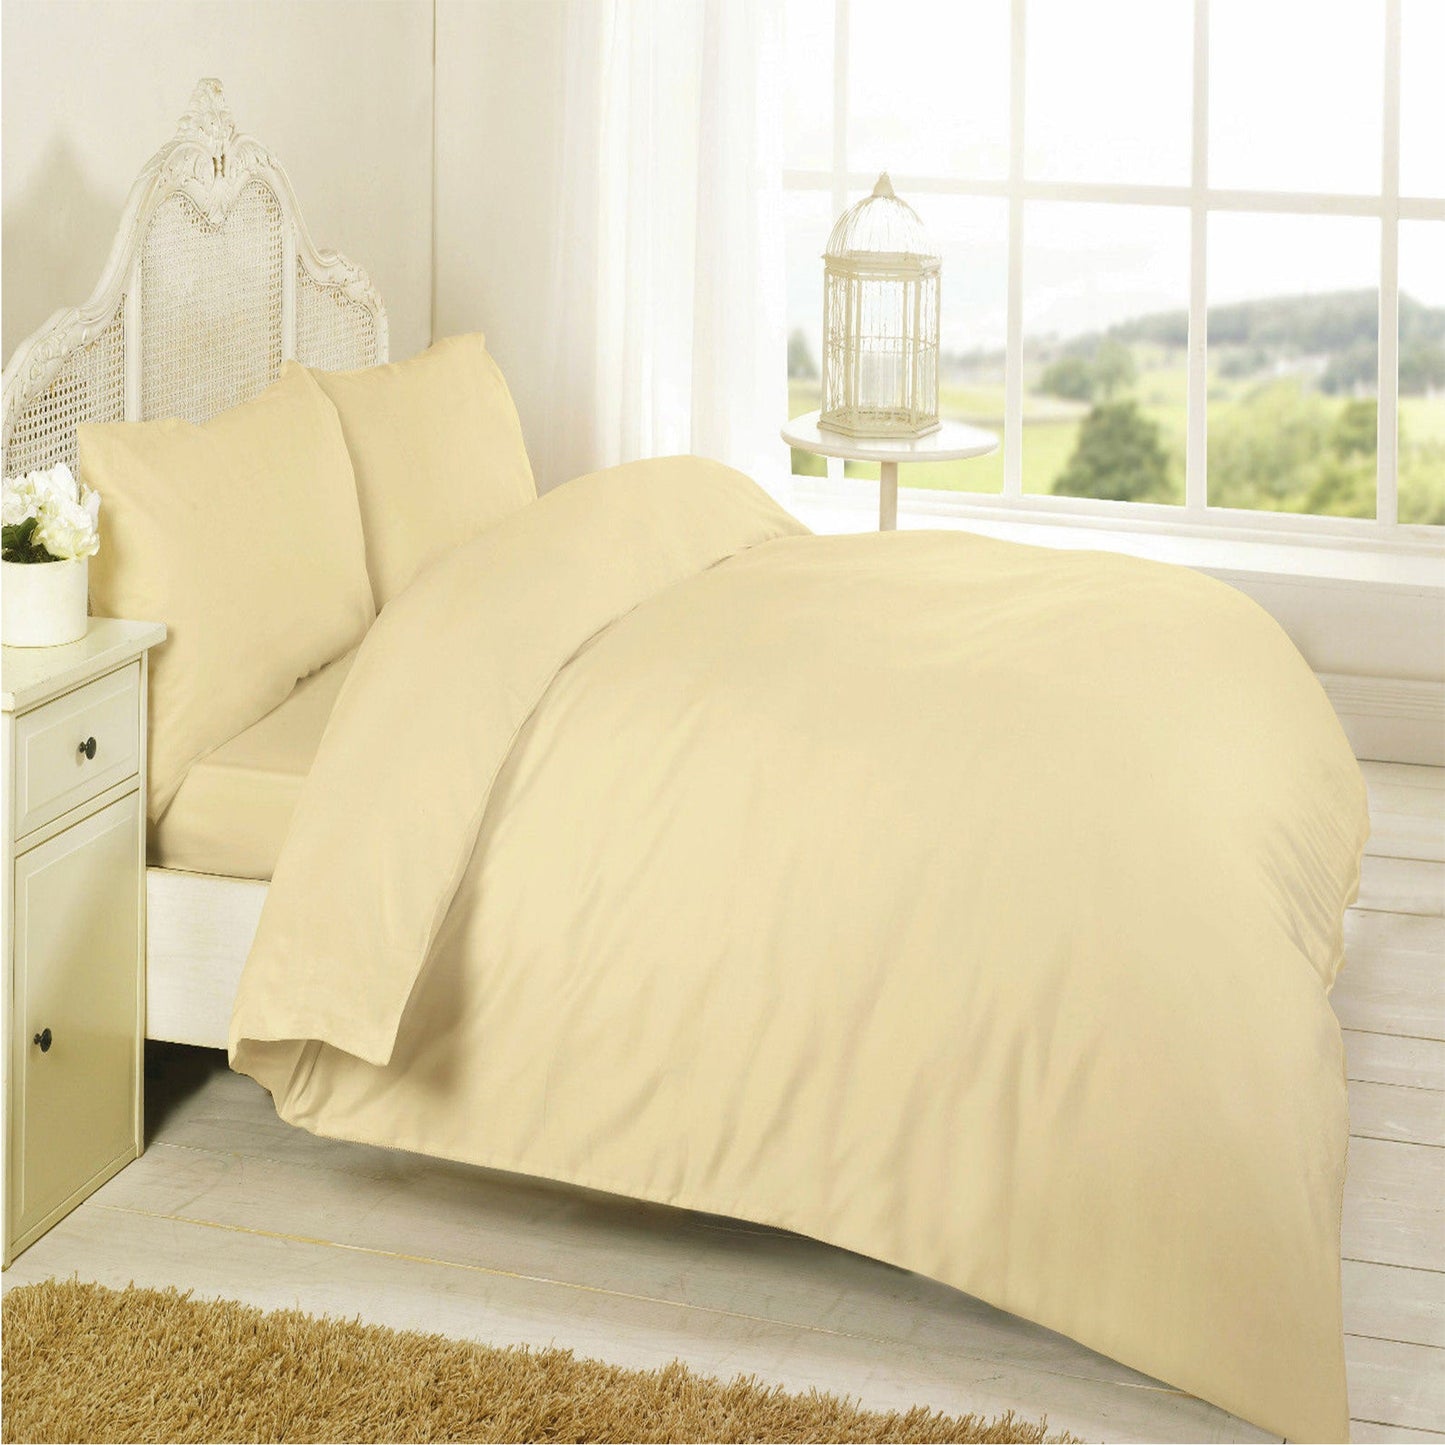 Egyptian Cotton T200 Duvet Cover Set In Several Sizes & Color, Pillow Cases Sold Separately - TheComfortshop.co.ukDuvet Covers0721718961826thecomfortshopTheComfortshop.co.ukLatte T200 Duvet SingleLatteSingleEgyptian Cotton T200 Duvet Cover Set In Several Sizes & Color, Pillow Cases Sold Separately - TheComfortshop.co.uk